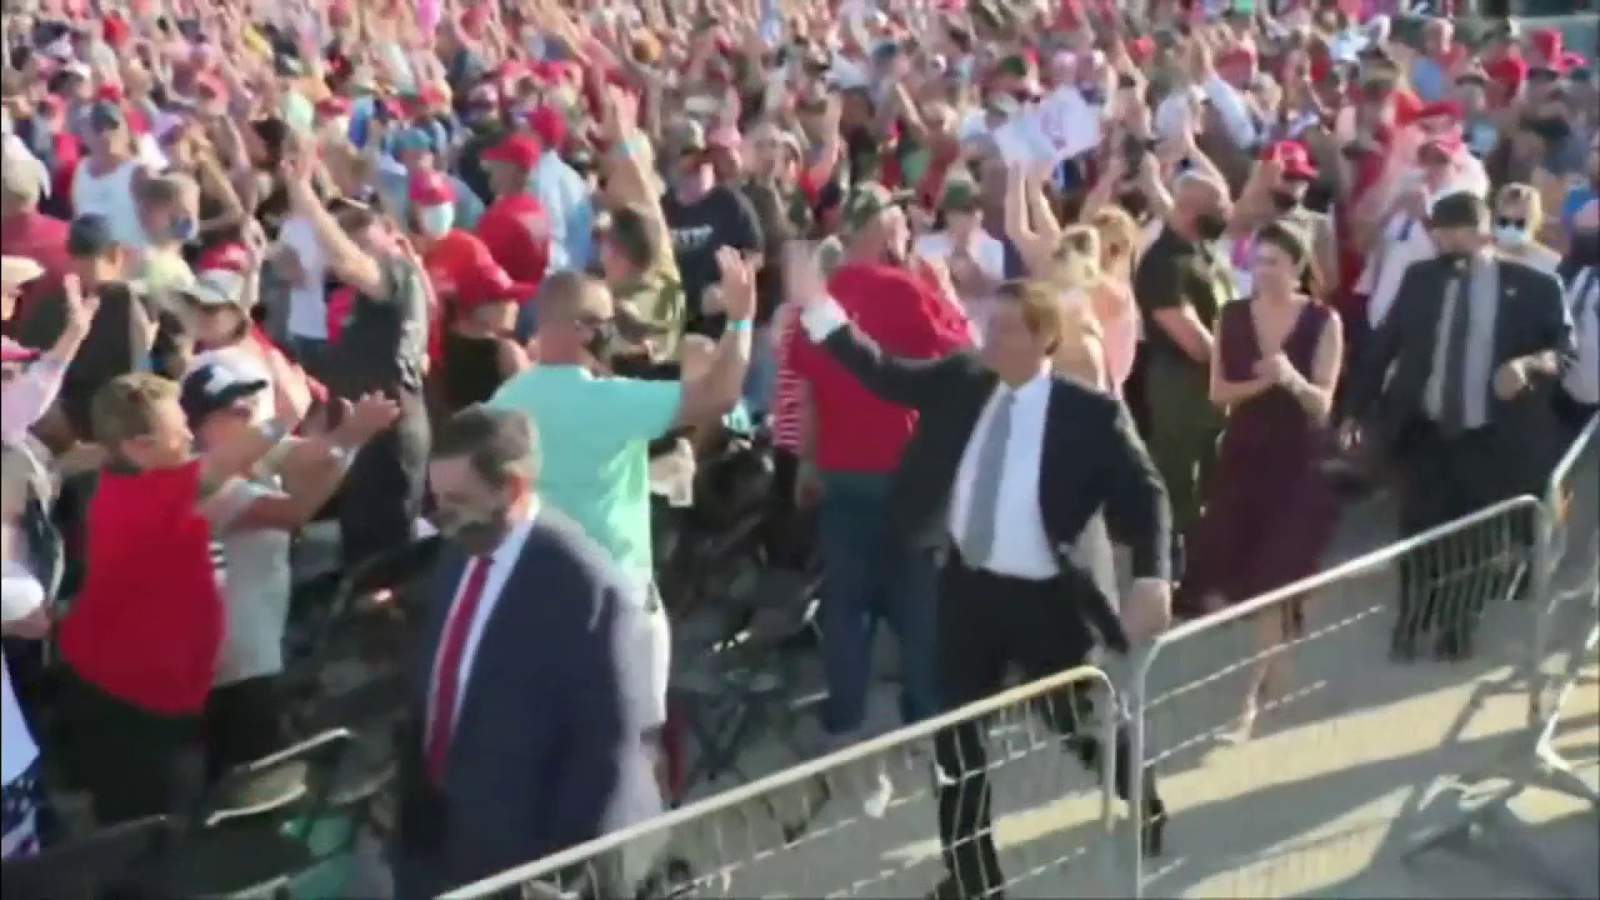 Florida doctors have harsh words for DeSantis, Trump following ‘unacceptable’ display at Sanford rally